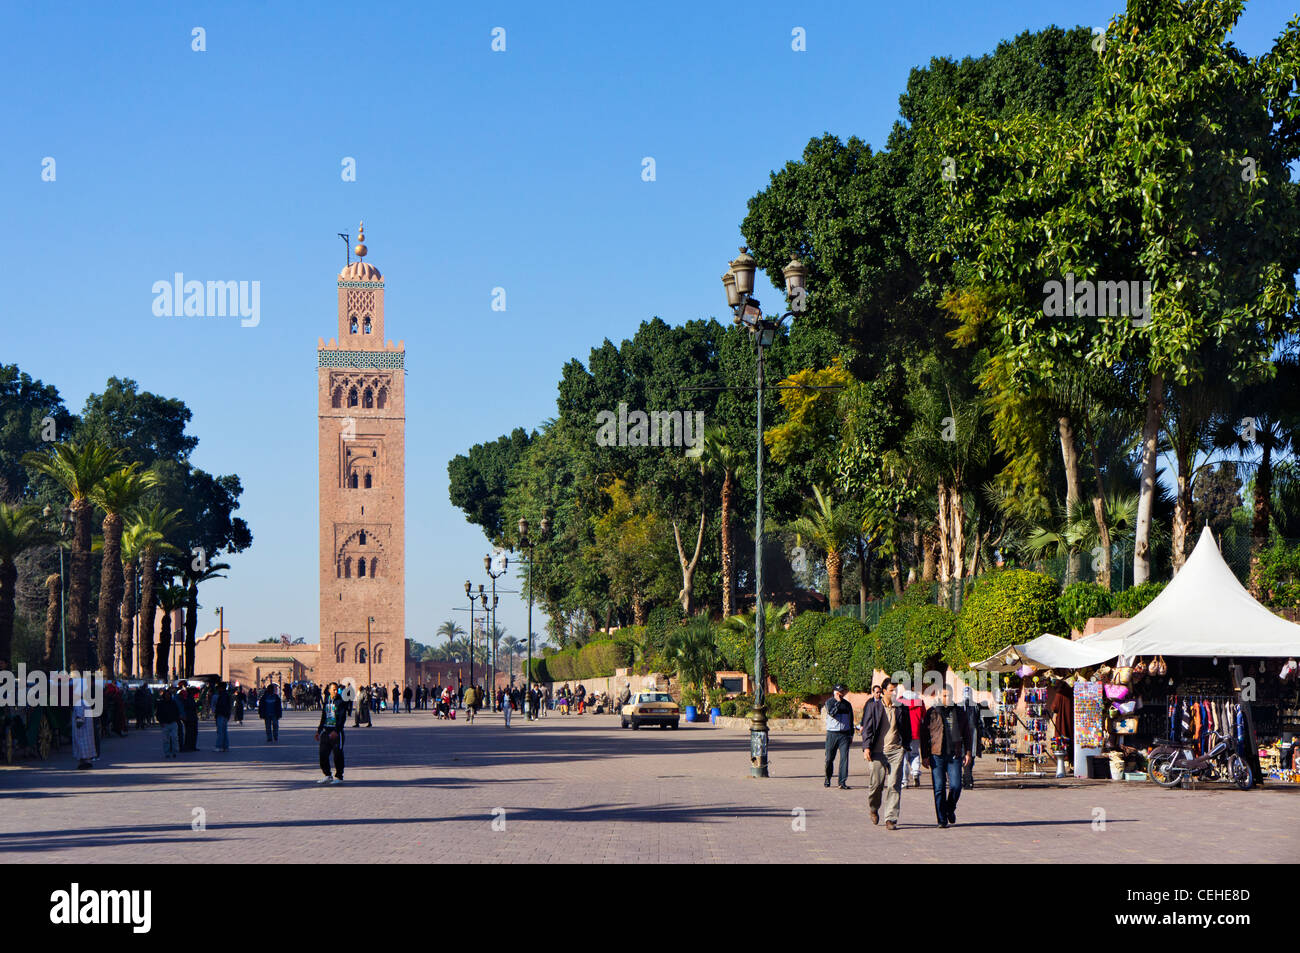 The minaret of the Koutoubia Mosque from Place Foucauld leading to the Djemaa el Fna sqare, Marrakech, Morocco, North Africa Stock Photo